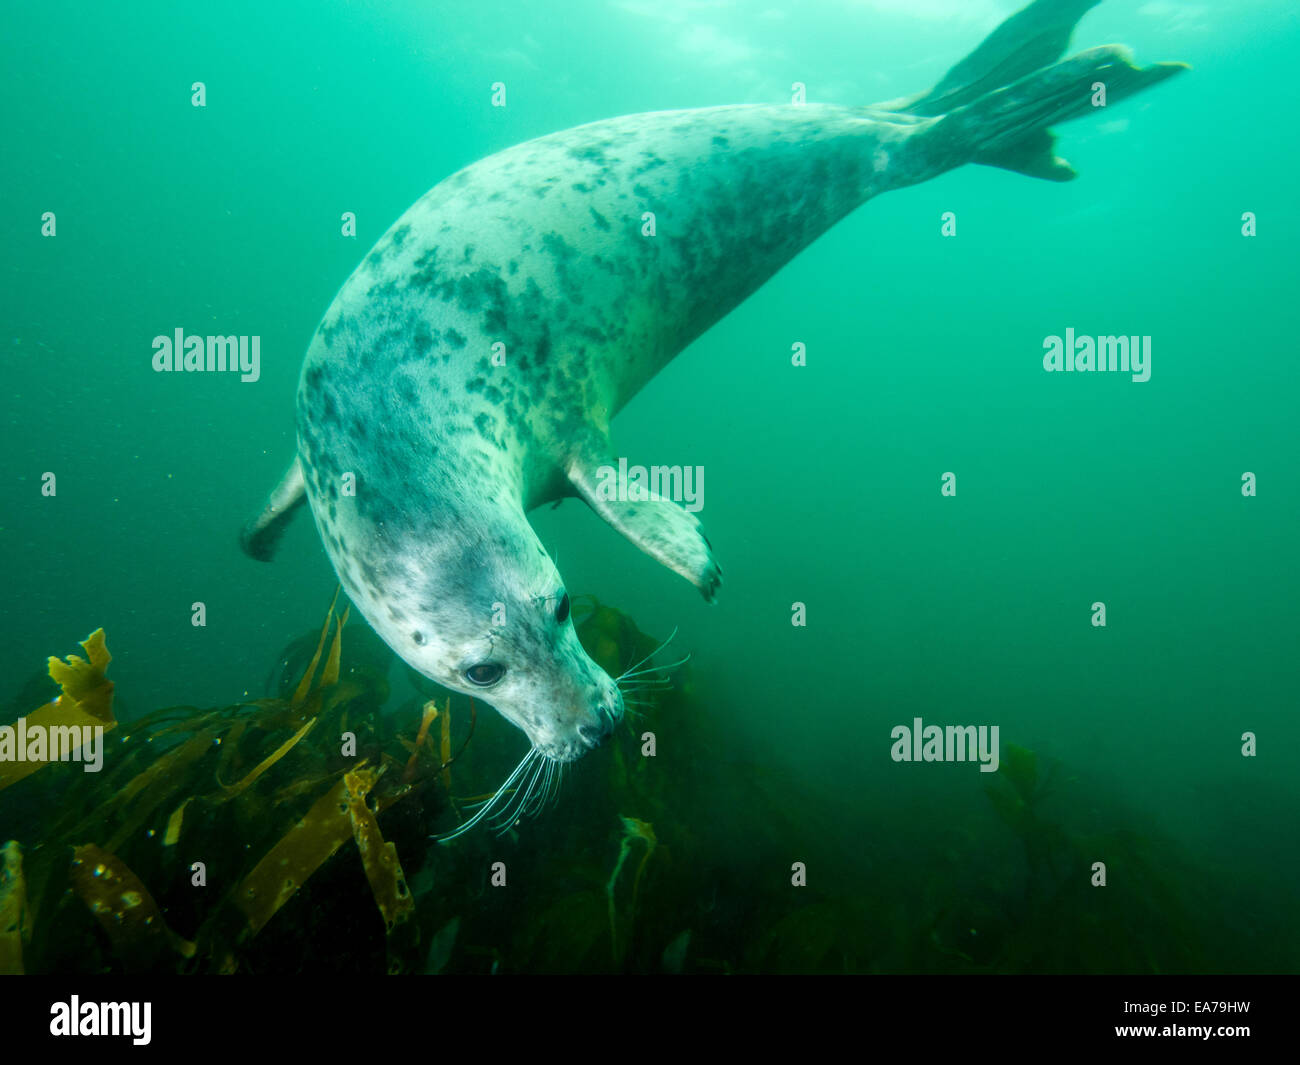 Underwater picture of grey seal in North Sea Stock Photo